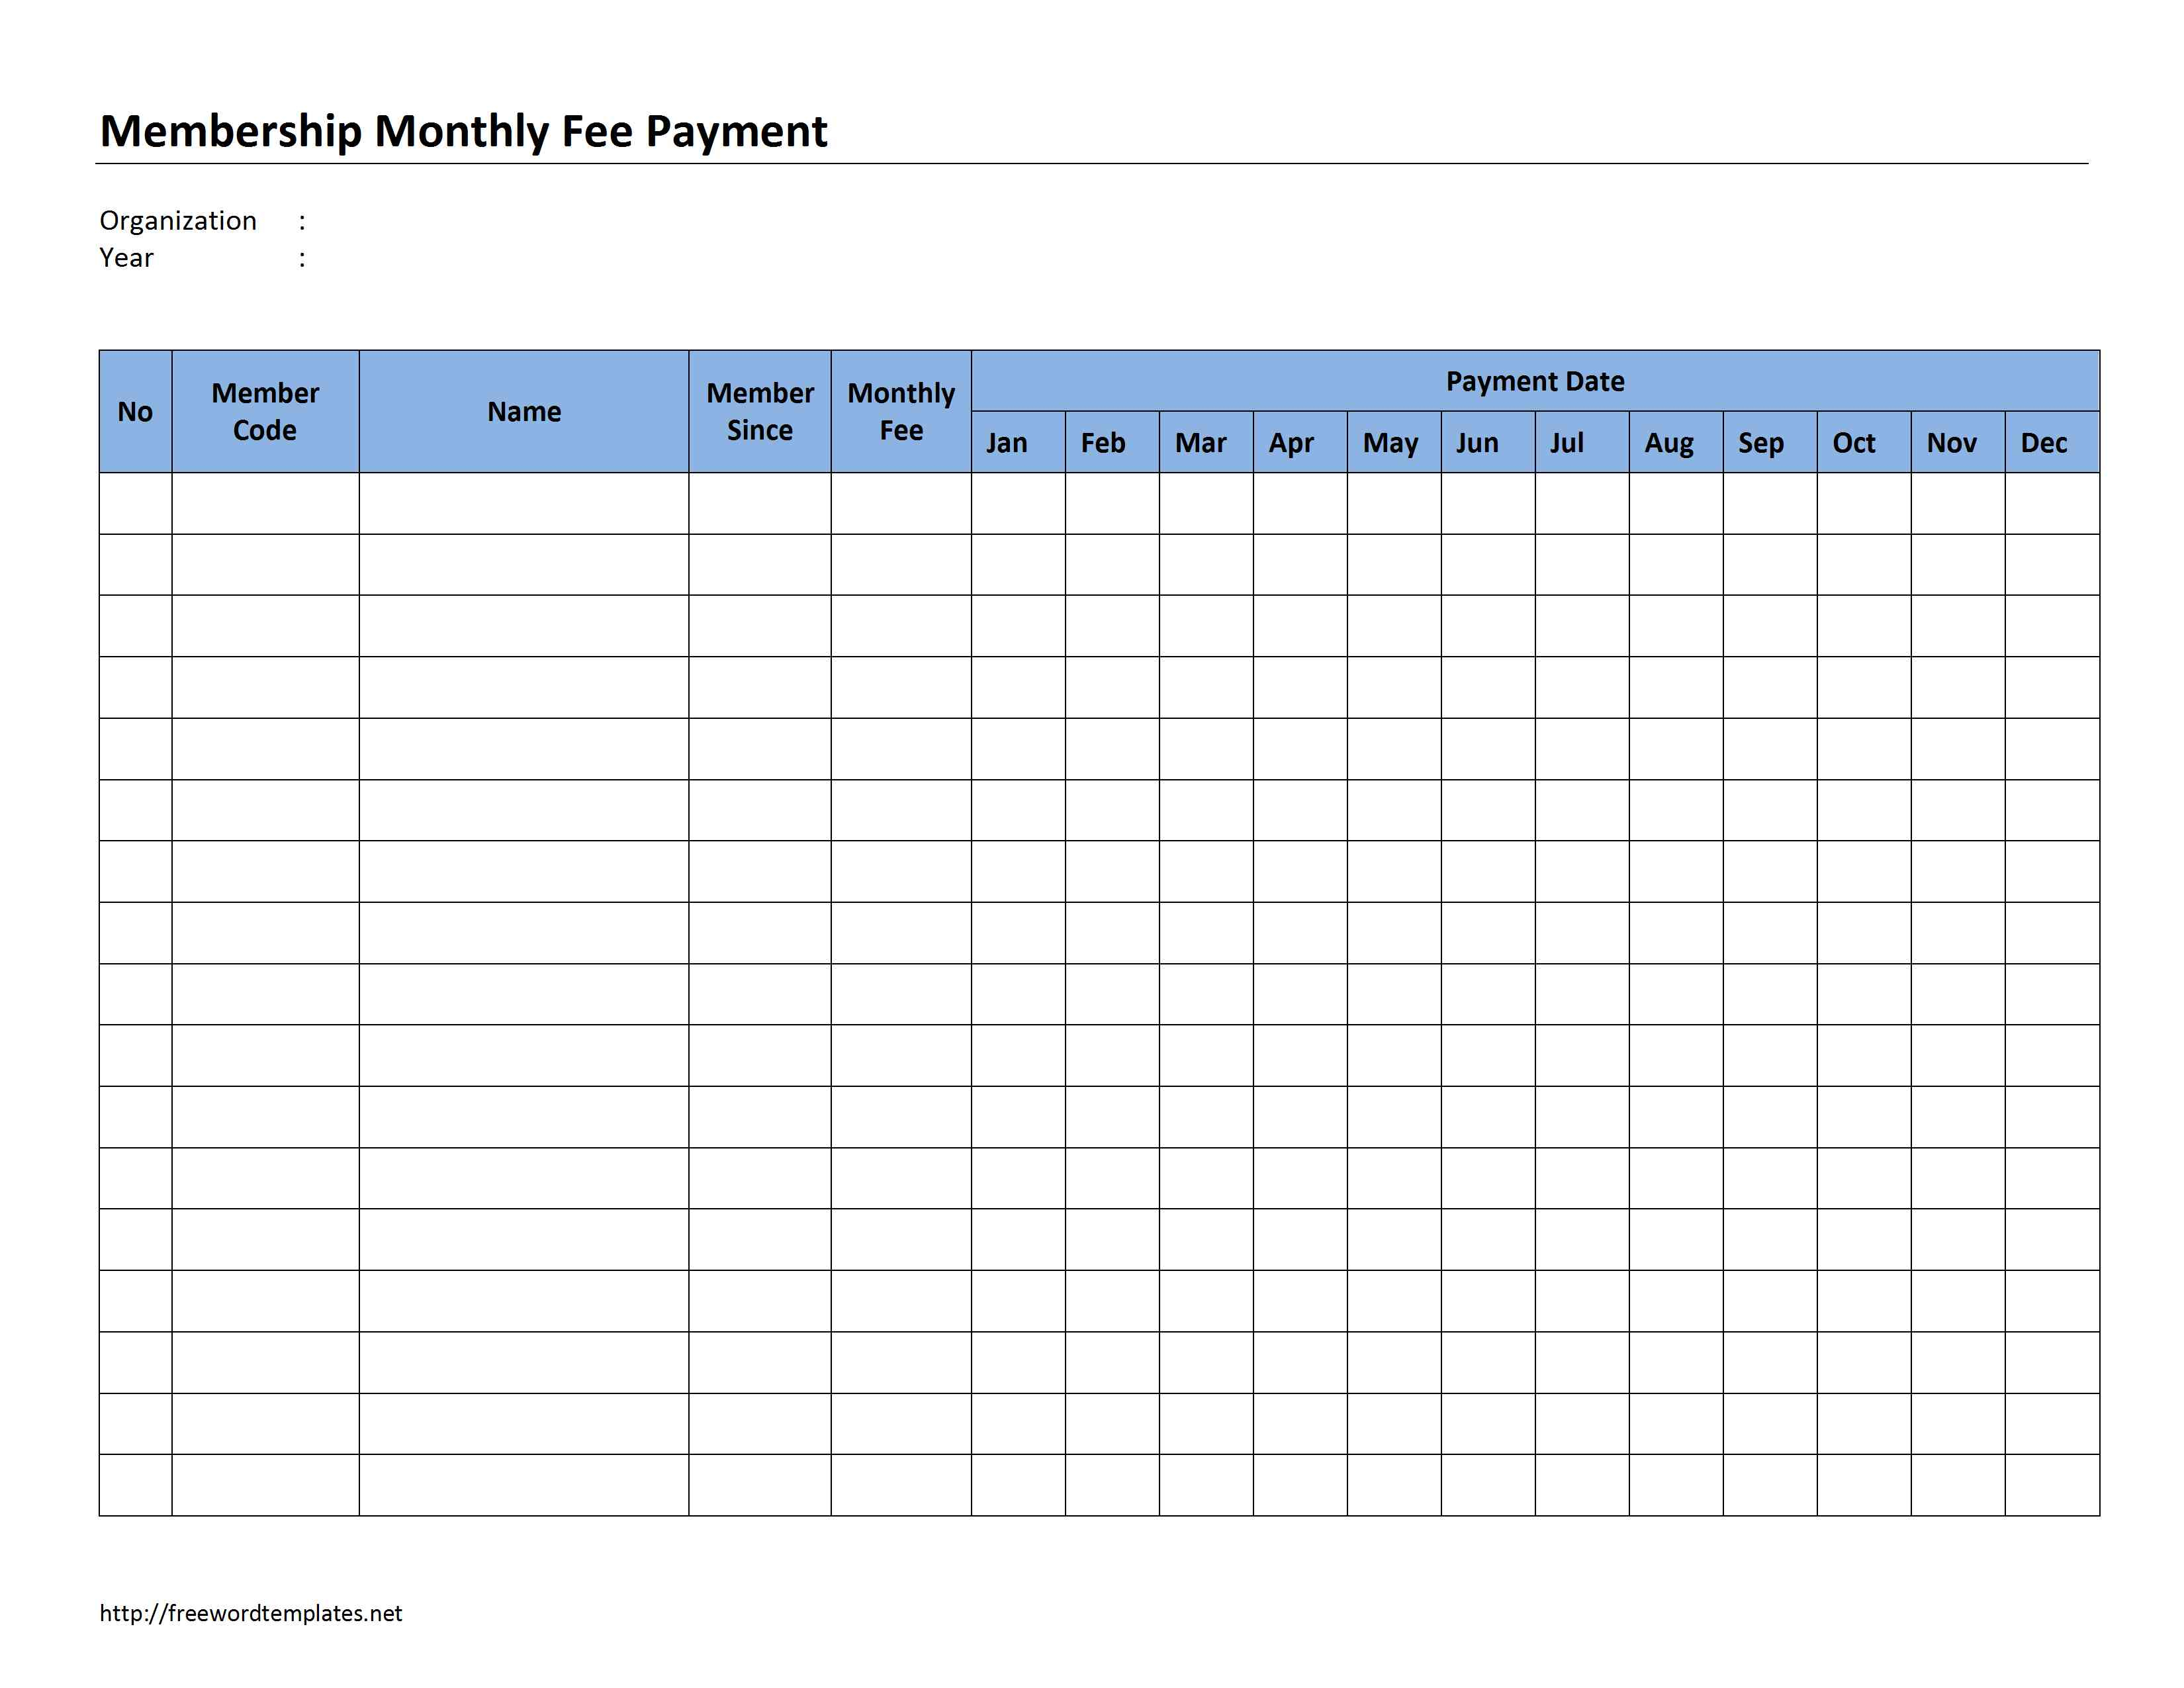 Membership Monthly Fee Payment